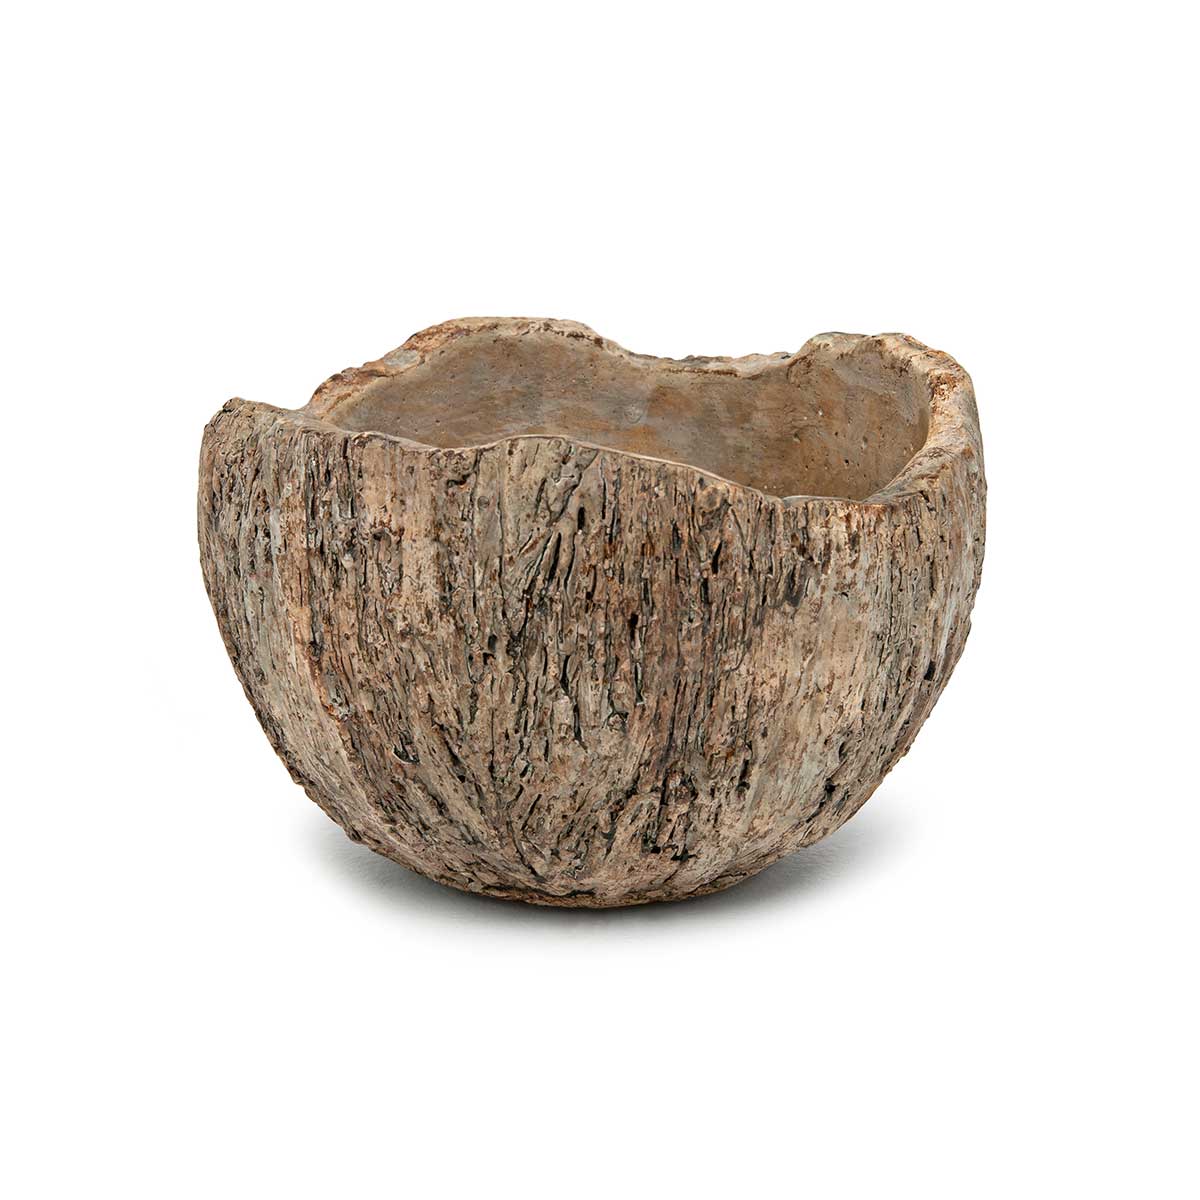 POT LOG LIVE EDGE BOWL SMALL 6IN X 4IN BROWN CONCRETE